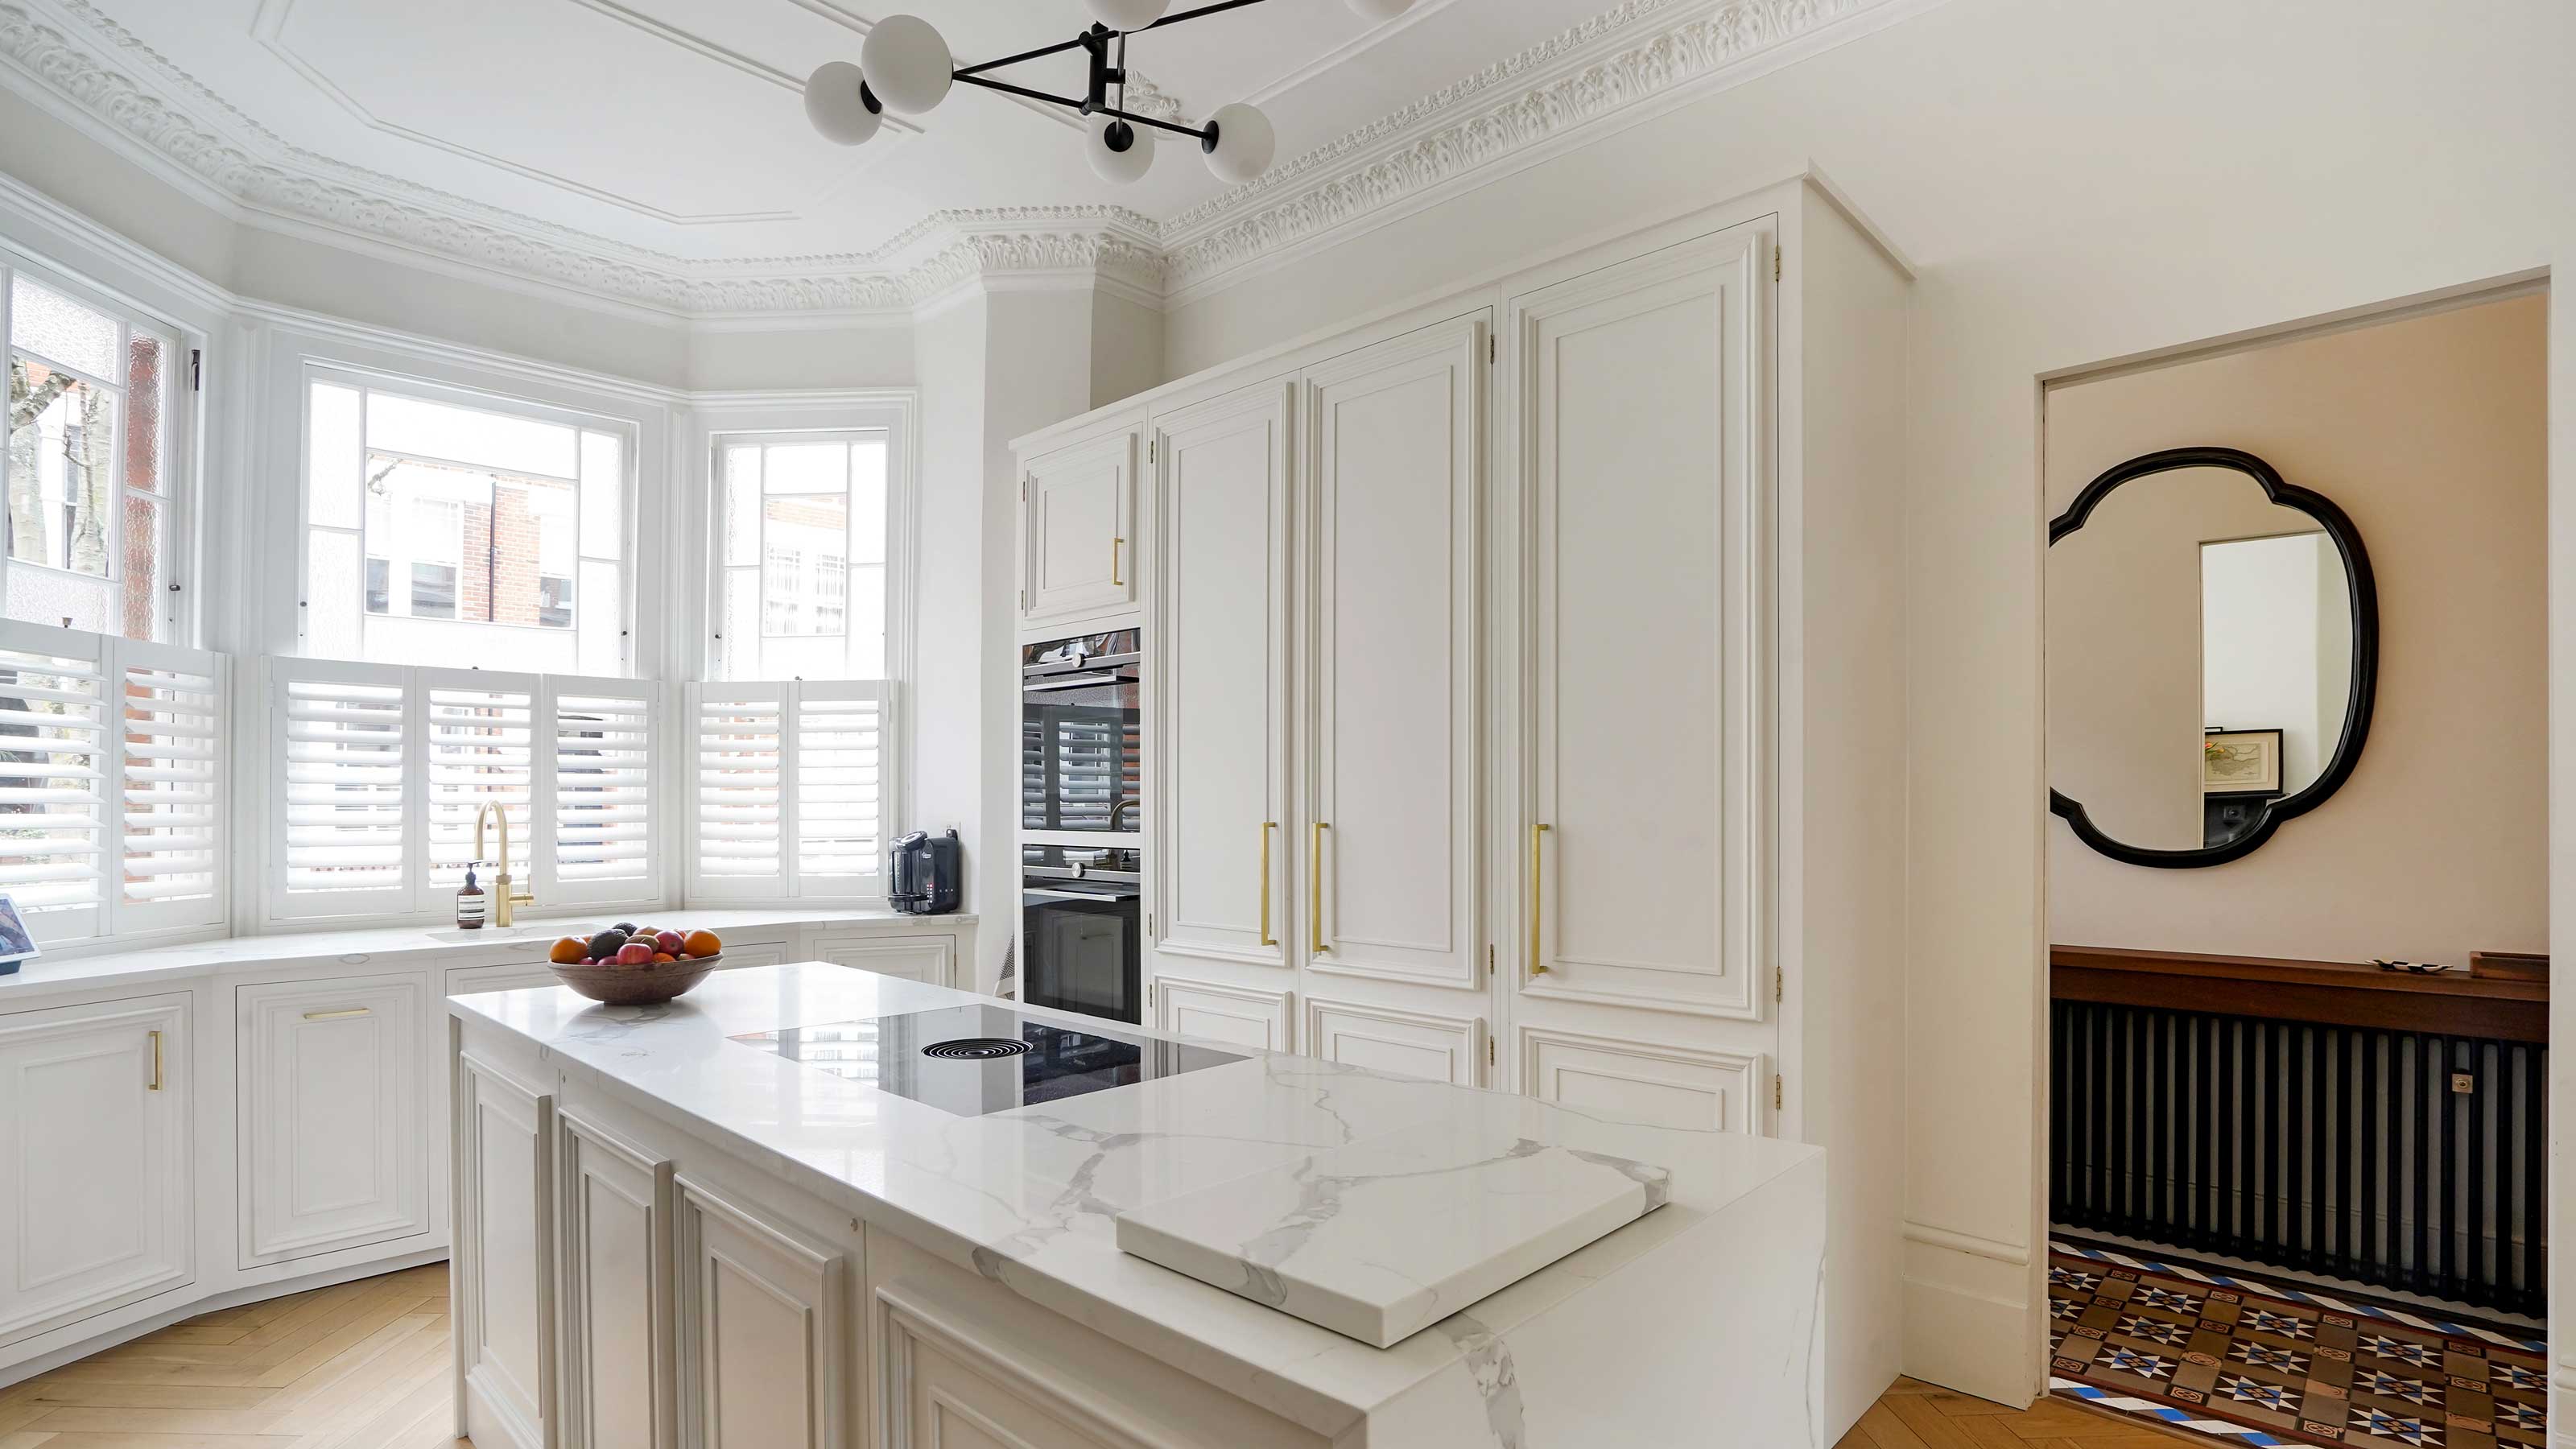 6 Things All Organized Kitchen Cabinets Have in Common